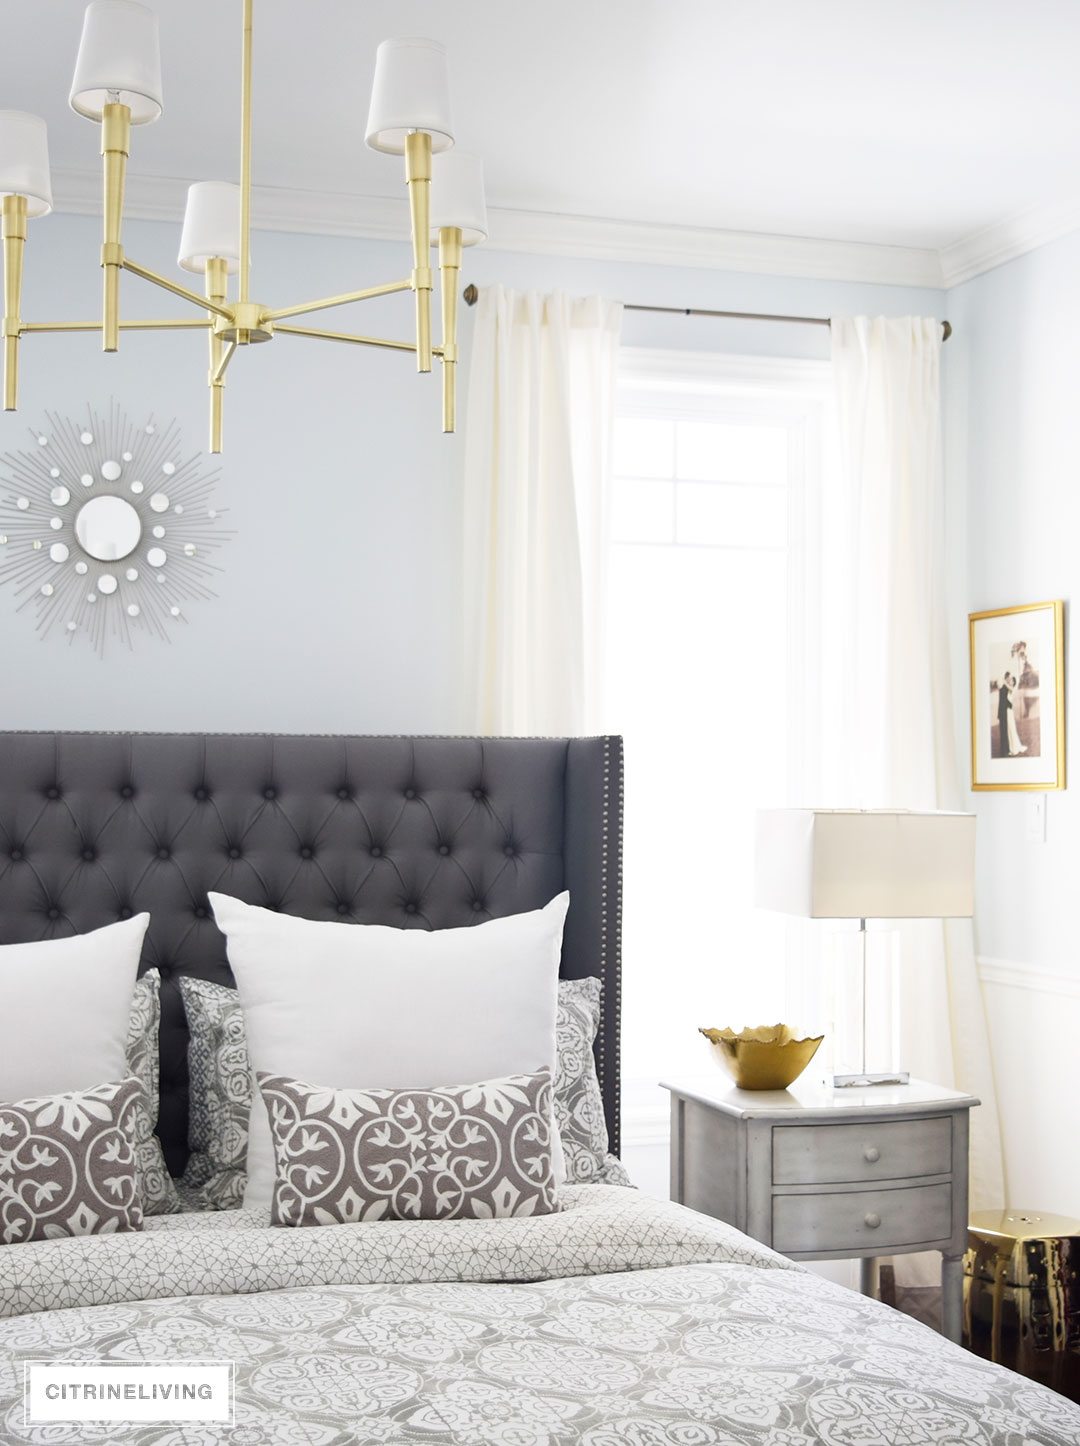 A brass chandelier and accents add modern sophistication to this elegant bedroom.